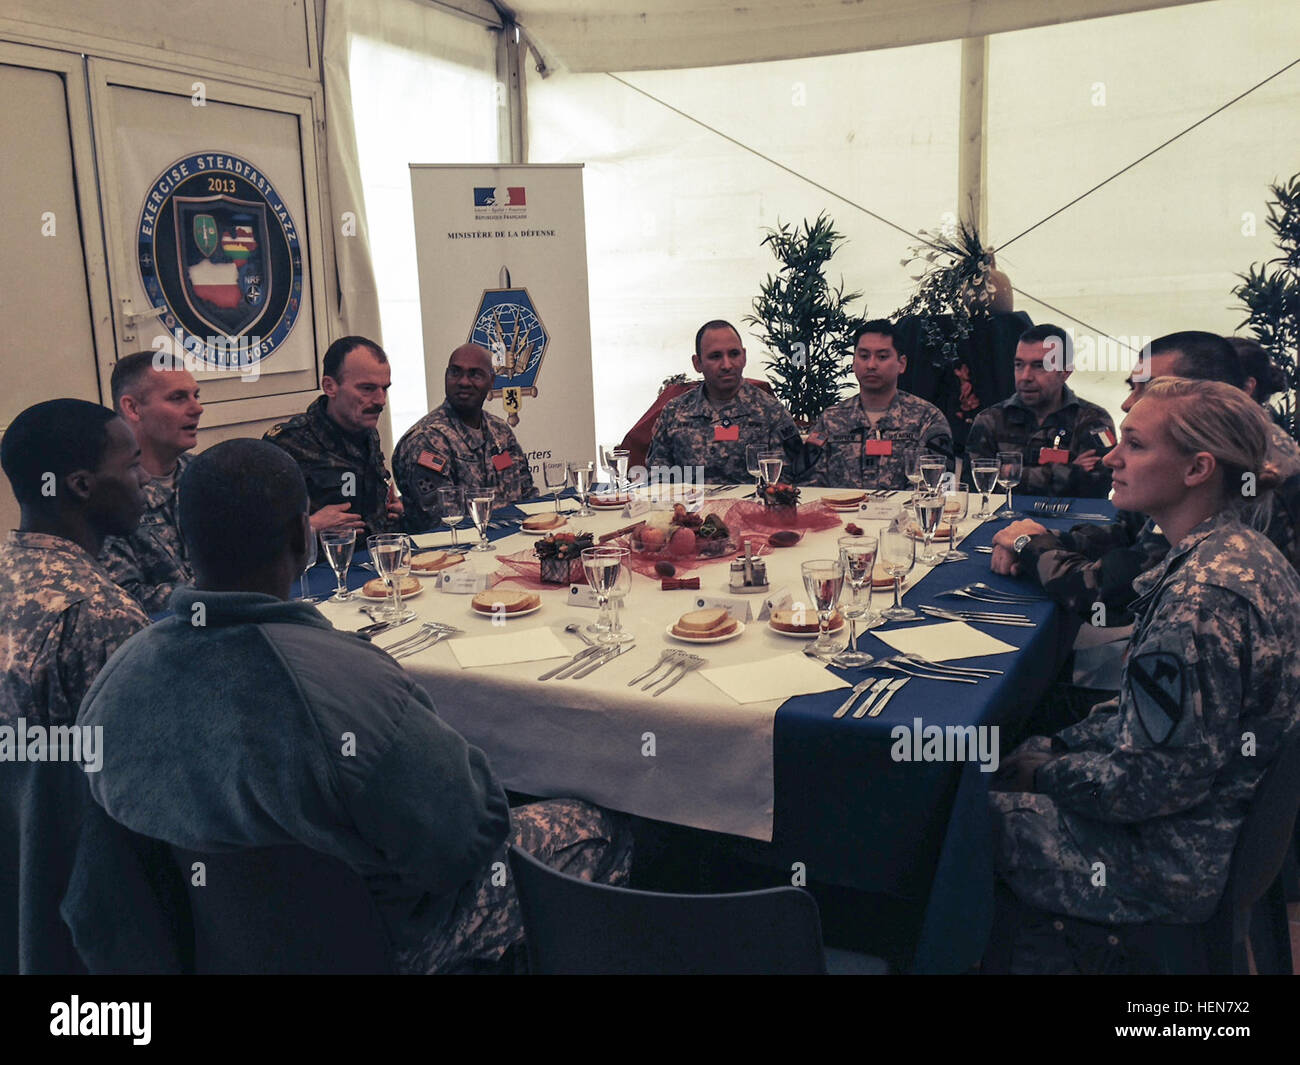 Soldiers of the 1st Brigade Combat Team, 1st Cavalry Division have lunch with the commander of Headquarters Rapid Reaction Corps - France, Lt. Gen. Eric Margail during Steadfast Jazz 2013 in Drawsko, Poland. SFJZ 13 is a NATO sponsored exercise to train, valuate and certify the NATO Response Force. (The badges in this image have been altered for security purposes). Ironhorse Brigade participates in Steadfast Jazz 2013 131101-A-ZZ247-056 Stock Photo